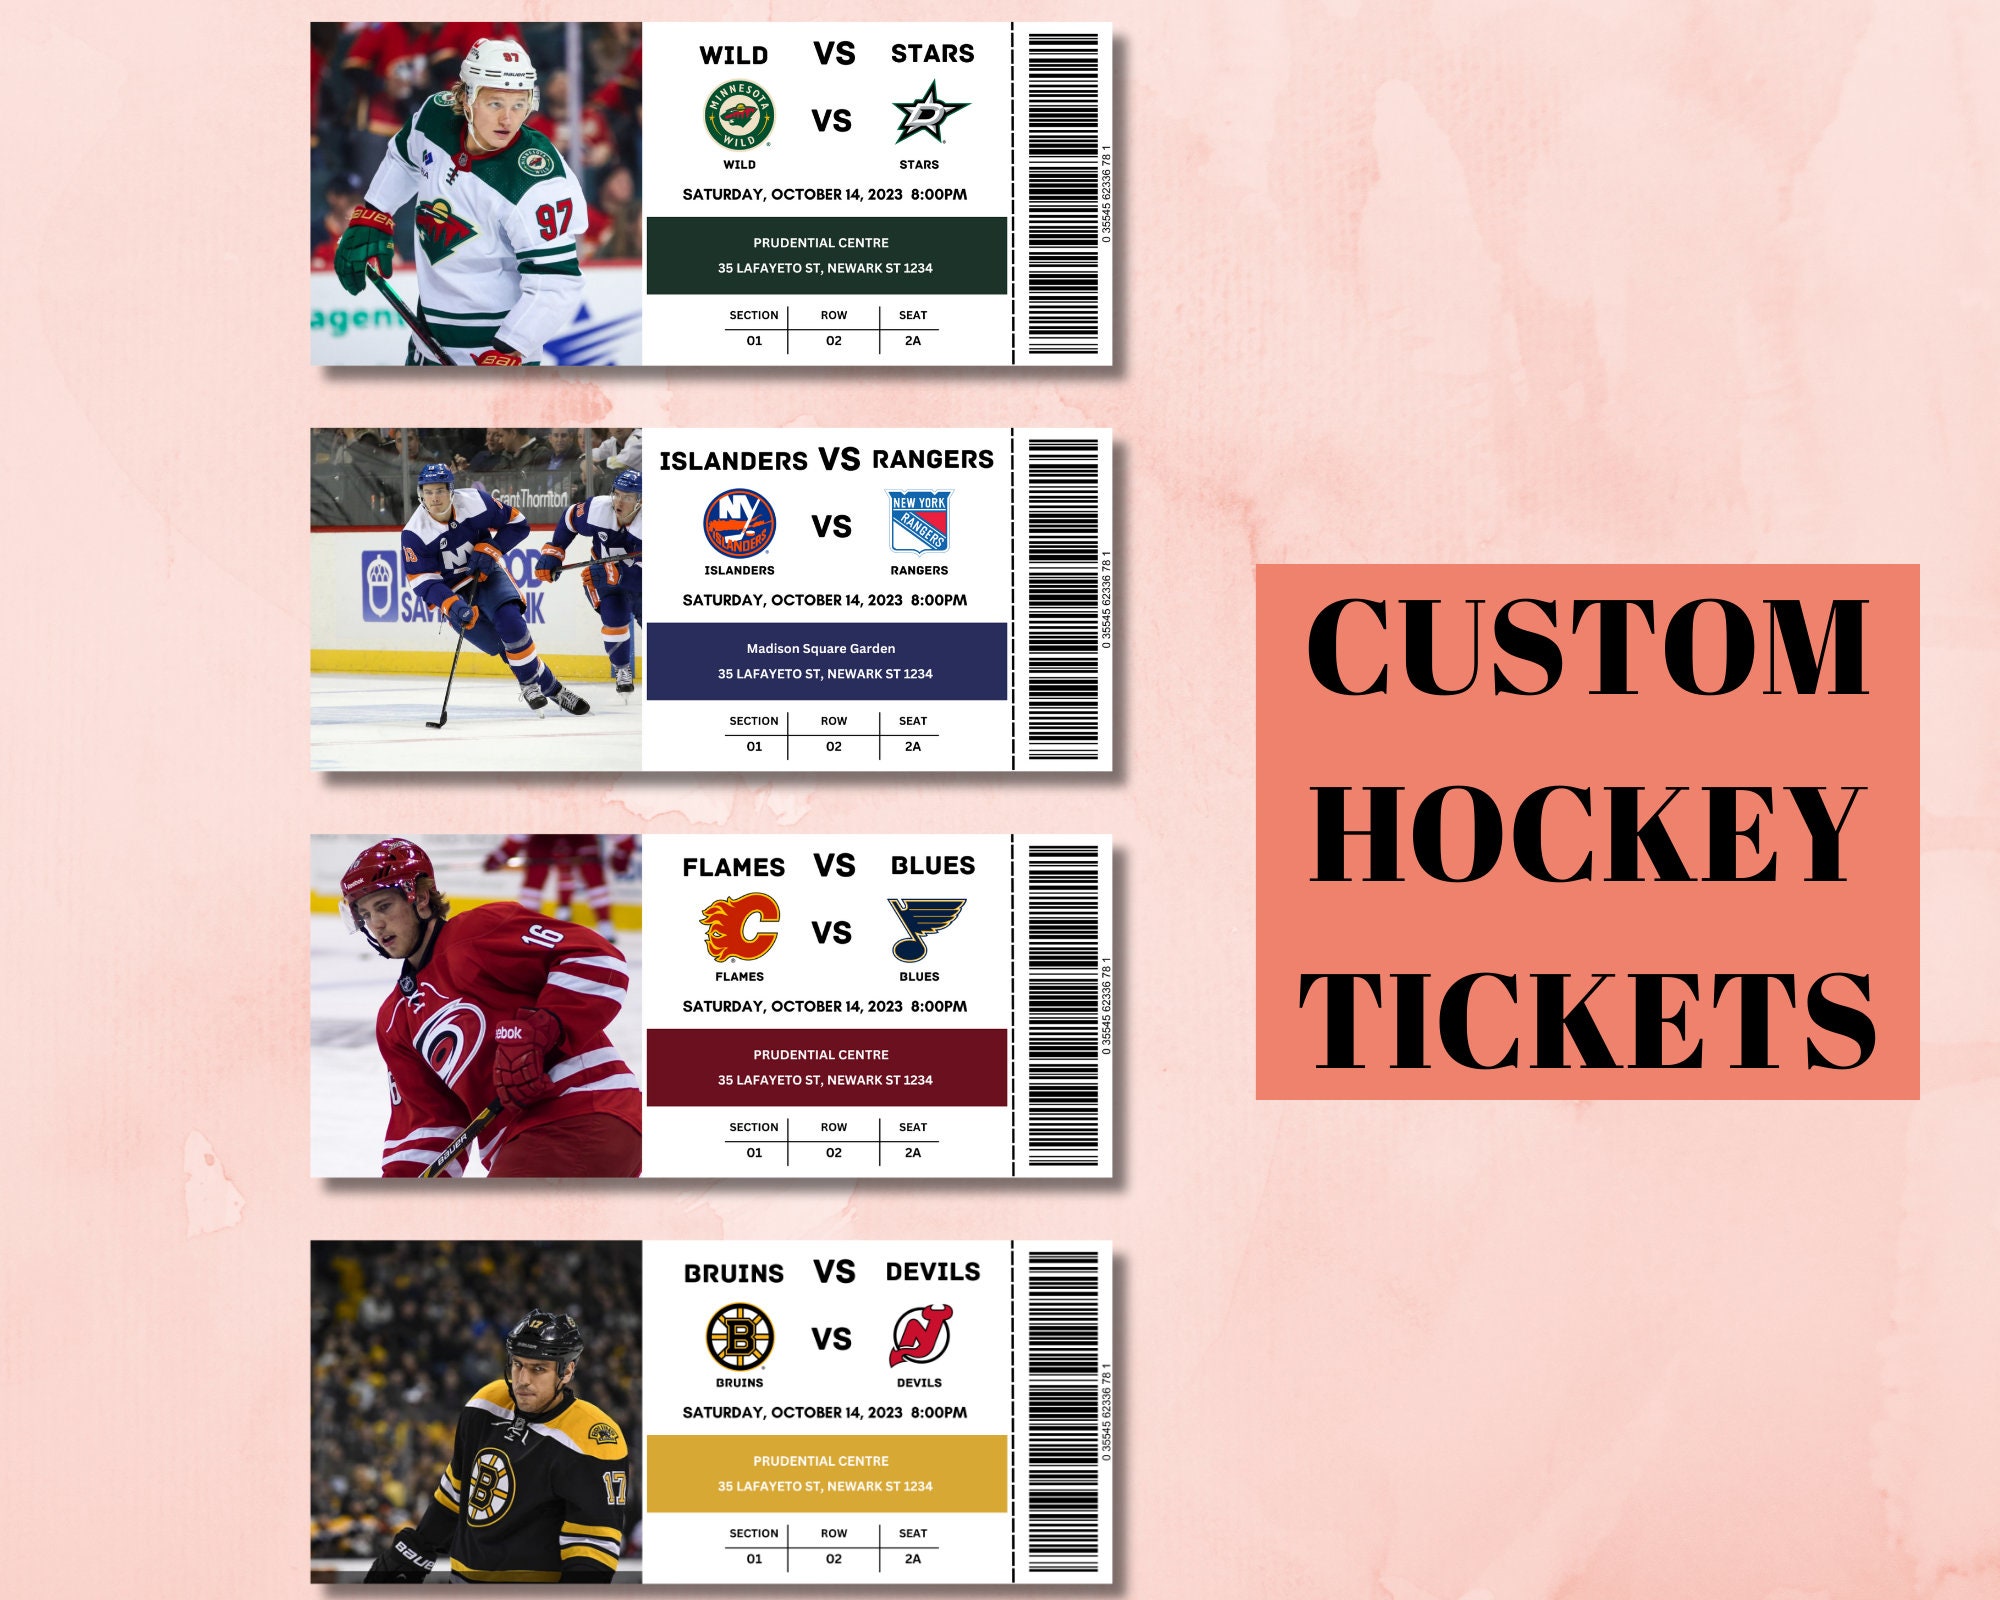 Customized New Jersey Devils Souvenir Ticket W/ QR Code From 